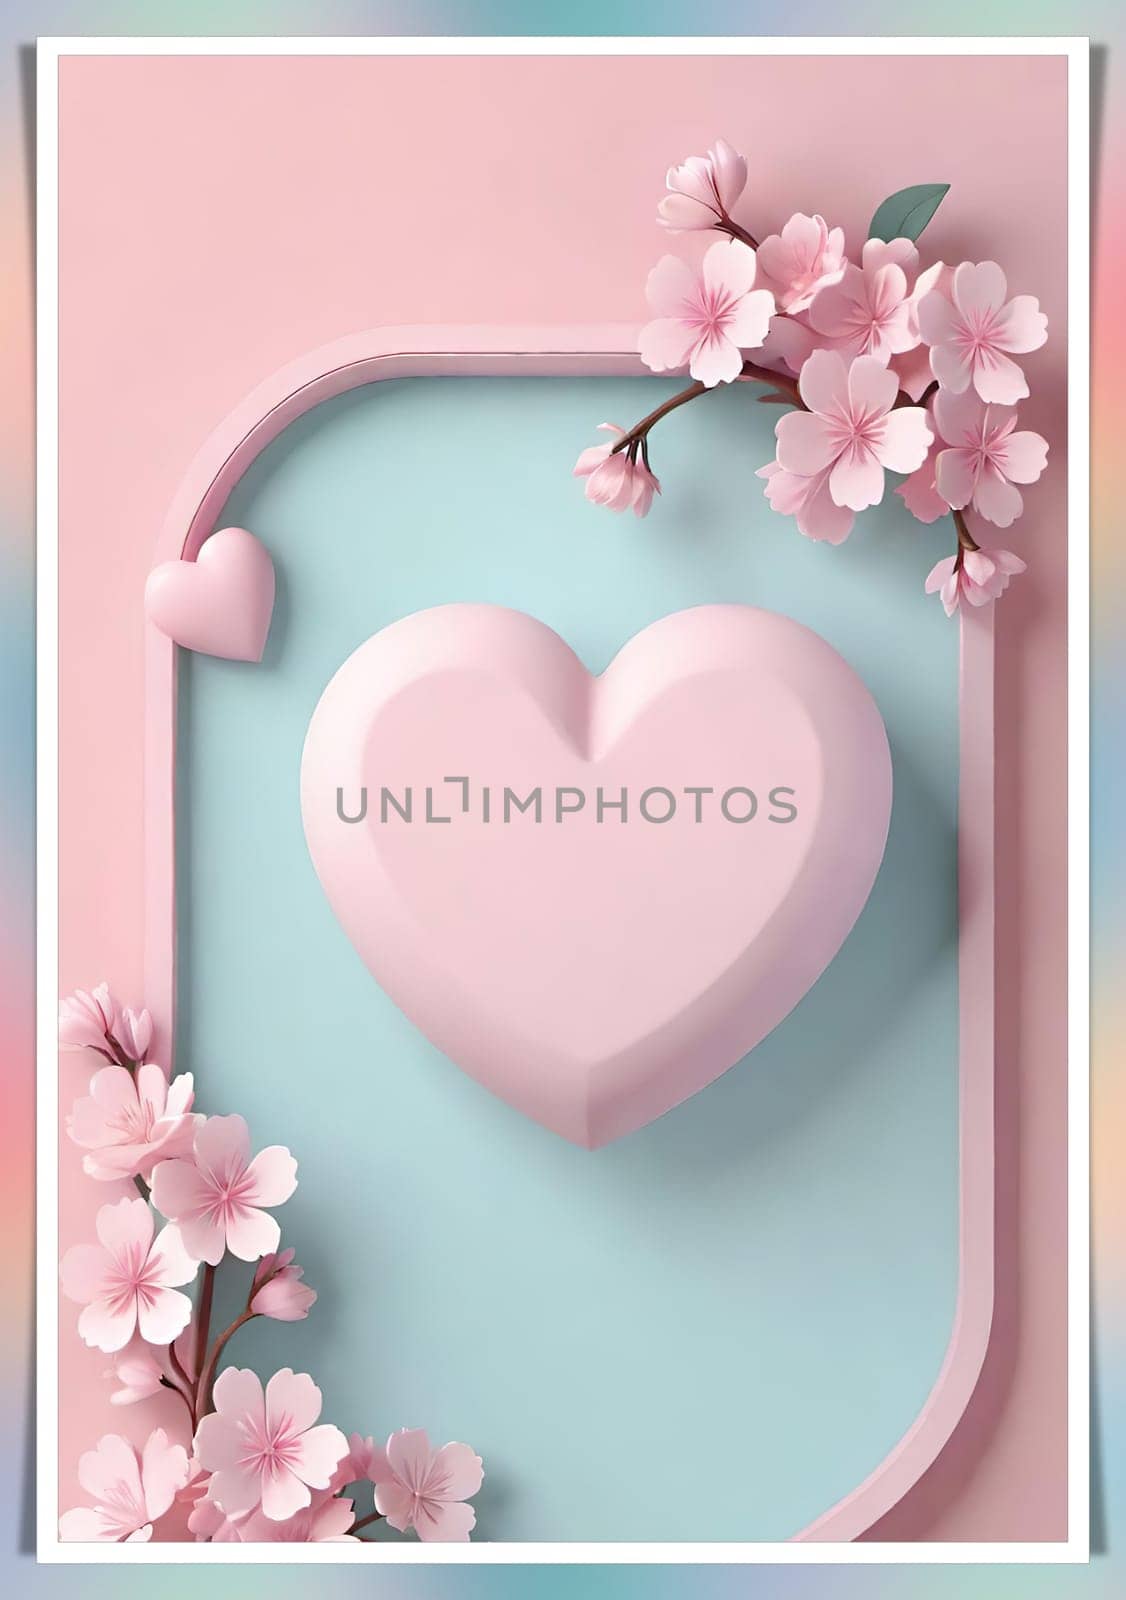 Valentine's Day background with hearts .Pastel colors.Valentine's day greeting card with heart.Minimal Valentine's Day concept. 3D rendering.Valentine's Day greeting card with hearts in pastel colors.Minimal love concept.Computer digital drawing.